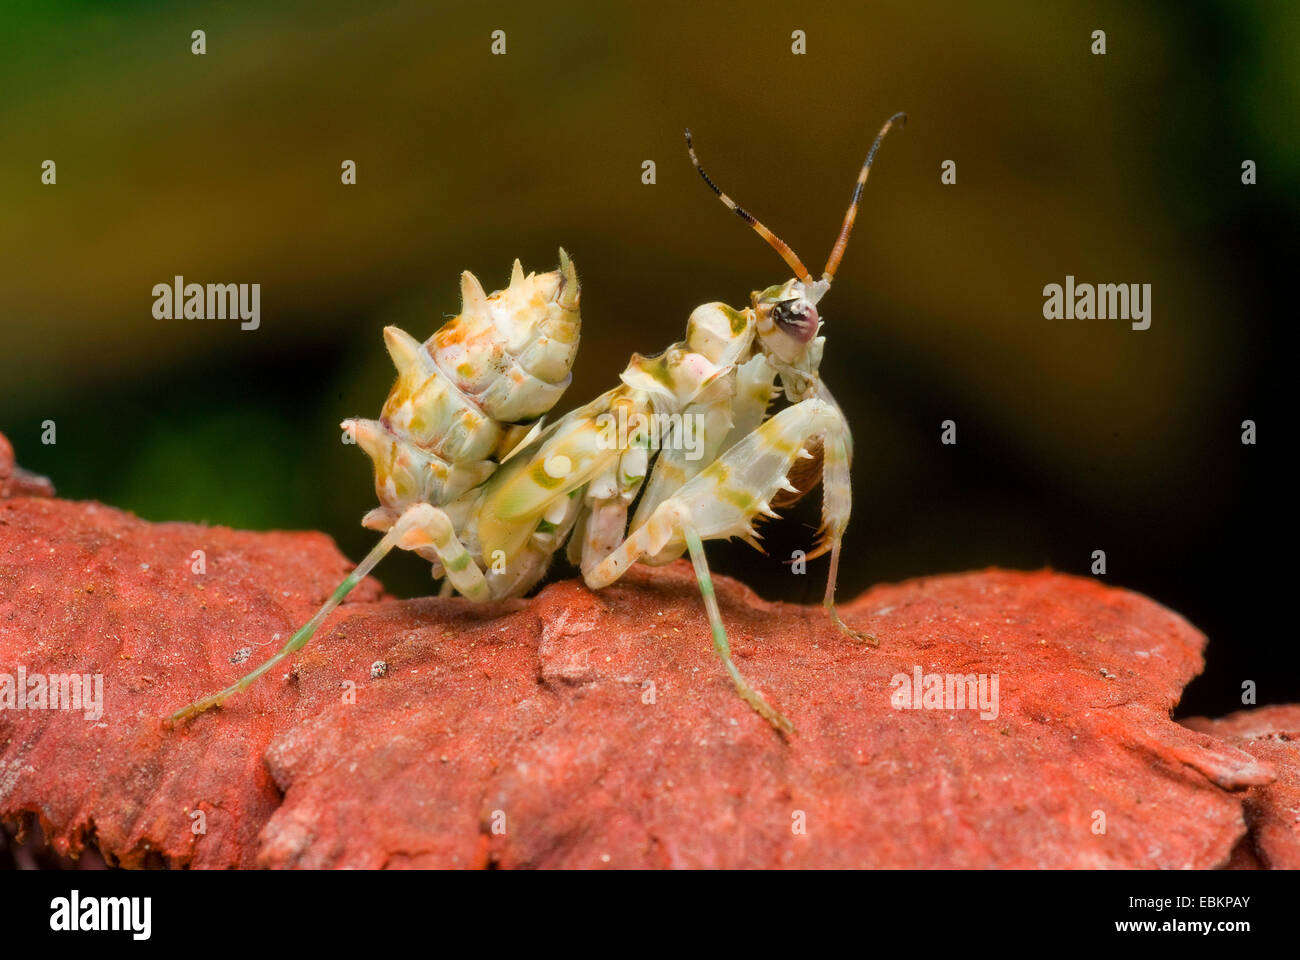 Ocellated Spiny Flower Mantis (Pseudocreobotra ocellata), on a stone Stock Photo